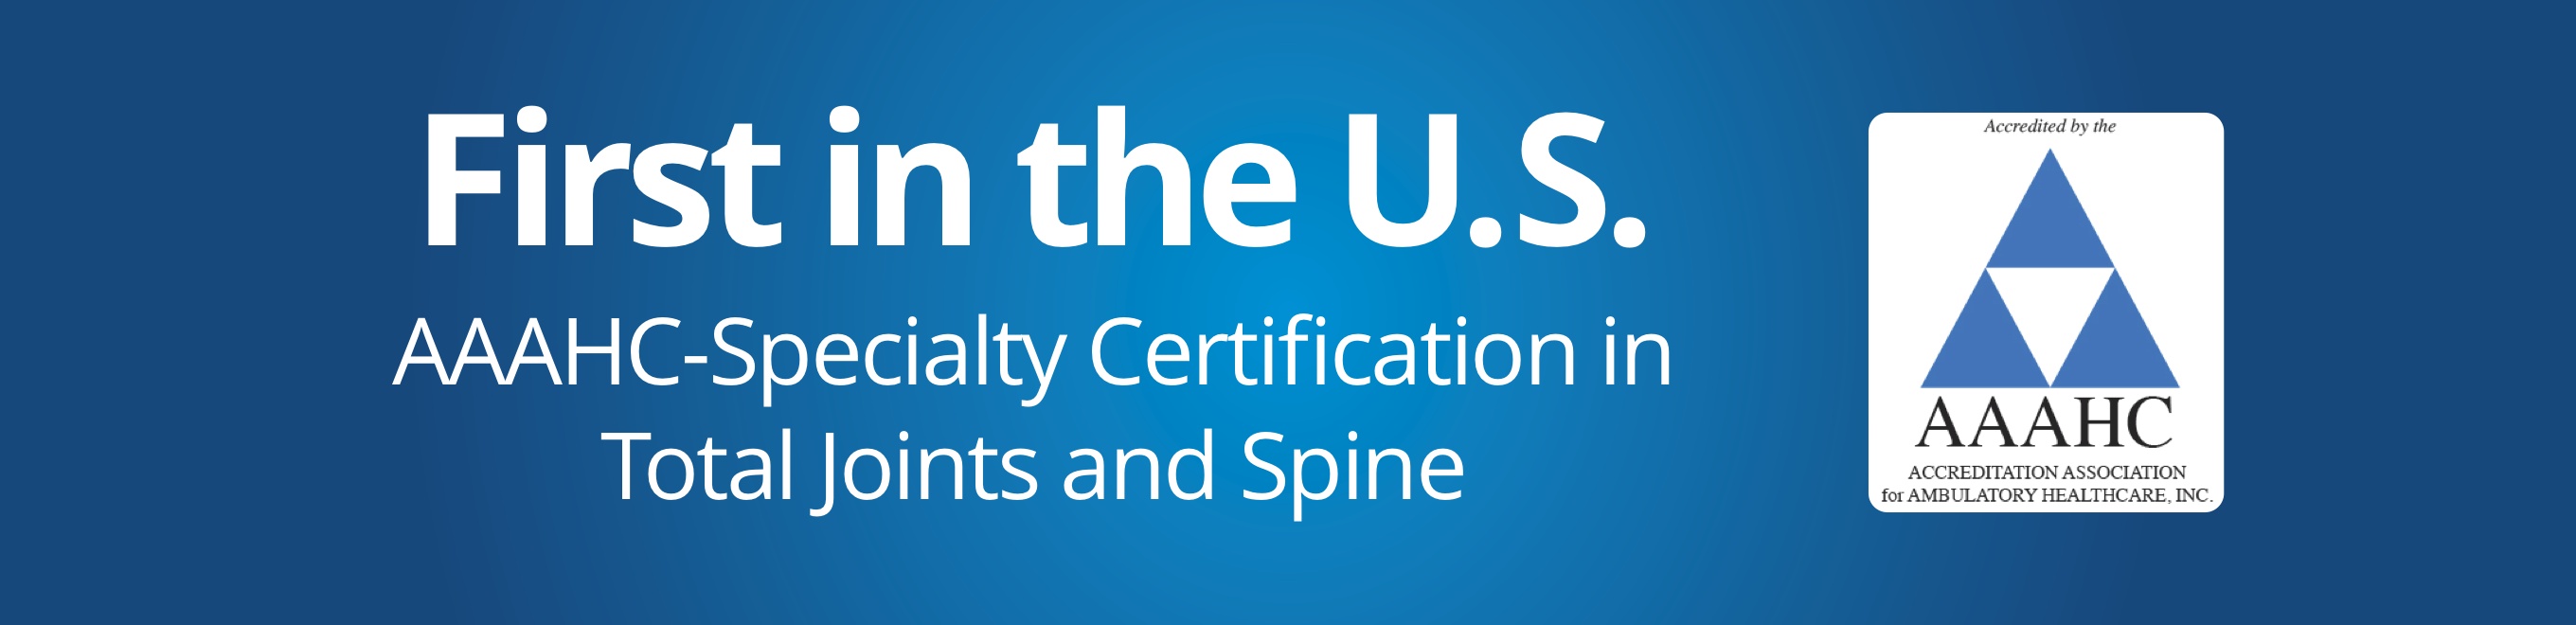 First in the US - AAAHC Specialty Certification in Total Joints and Spine